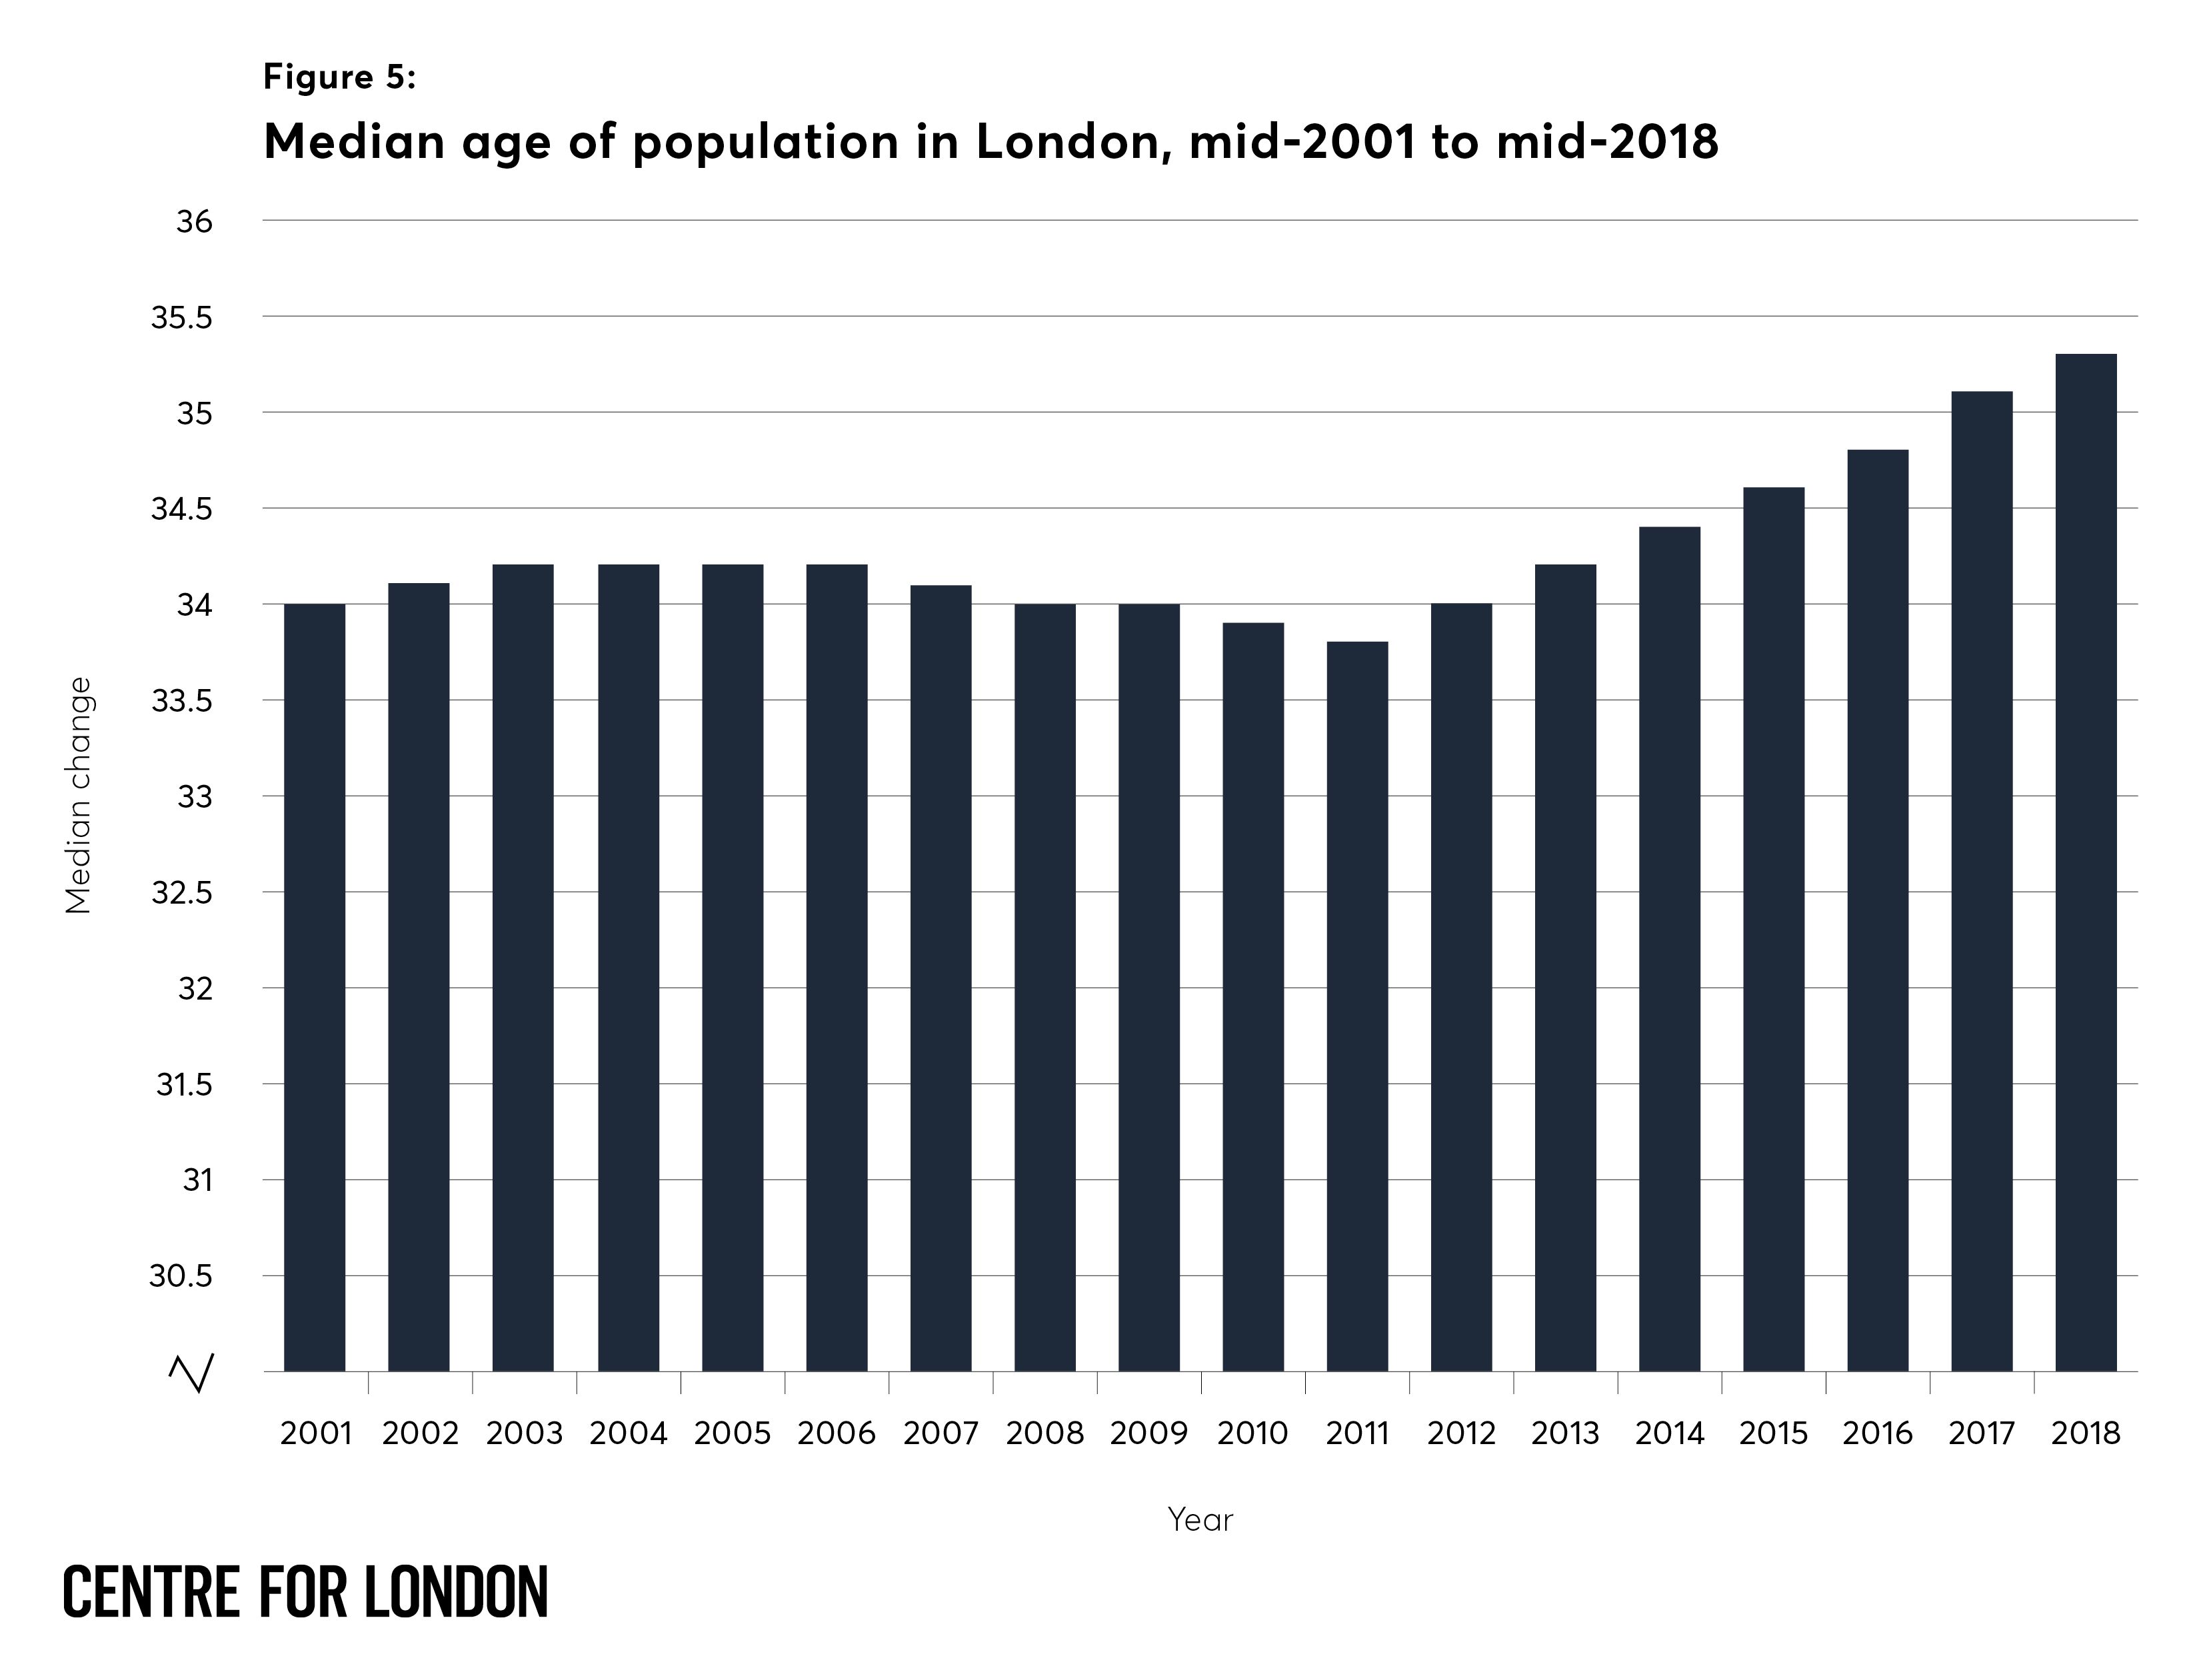 Figure 5: Median age of population in London, mid-2009 to mid-2018